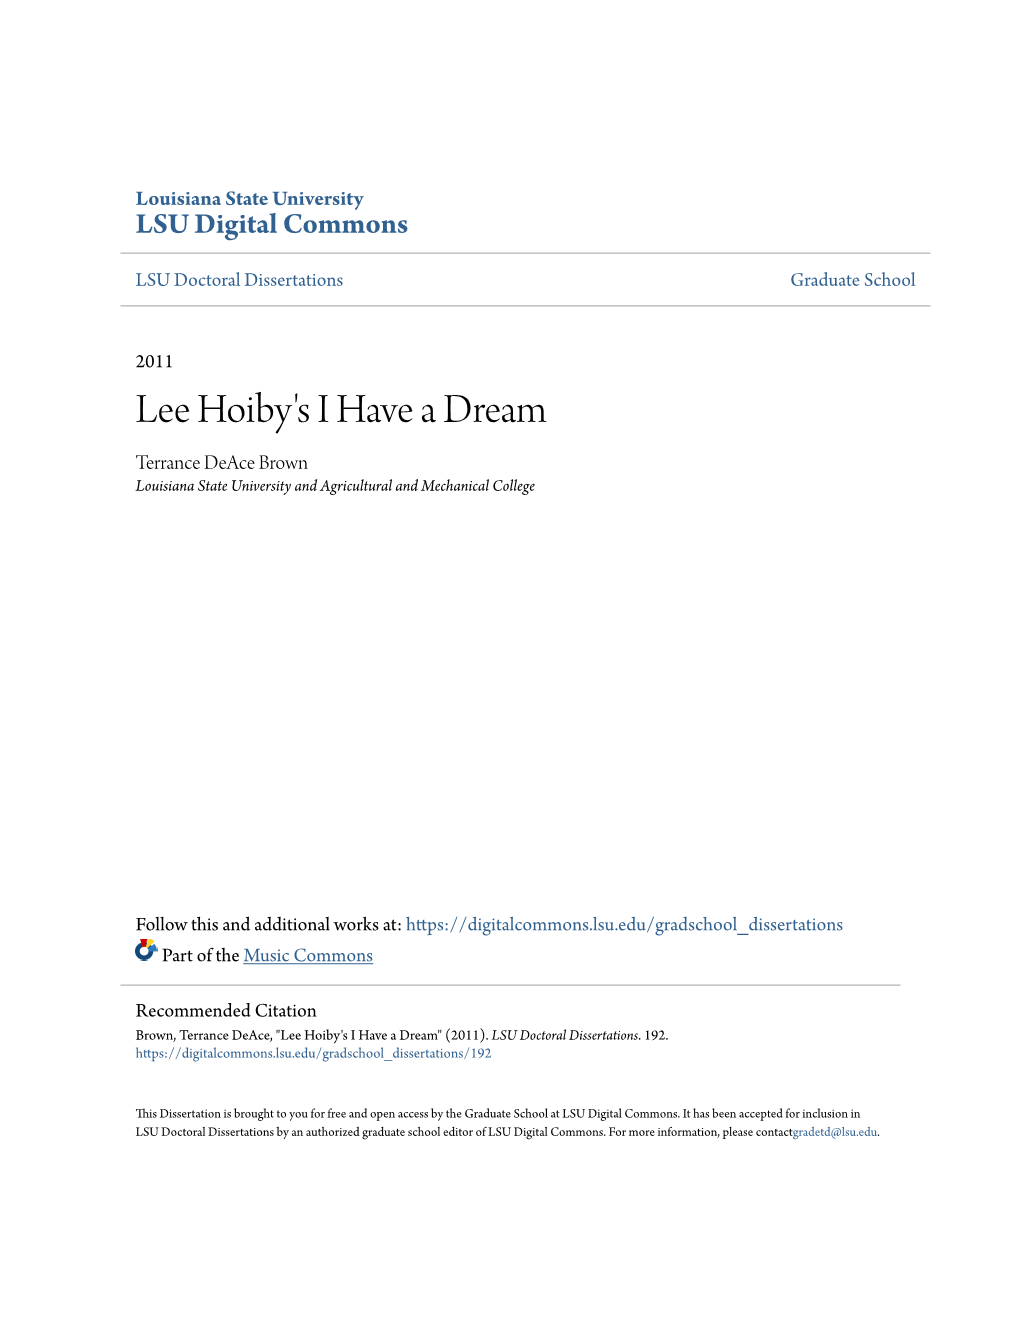 Lee Hoiby's I Have a Dream Terrance Deace Brown Louisiana State University and Agricultural and Mechanical College